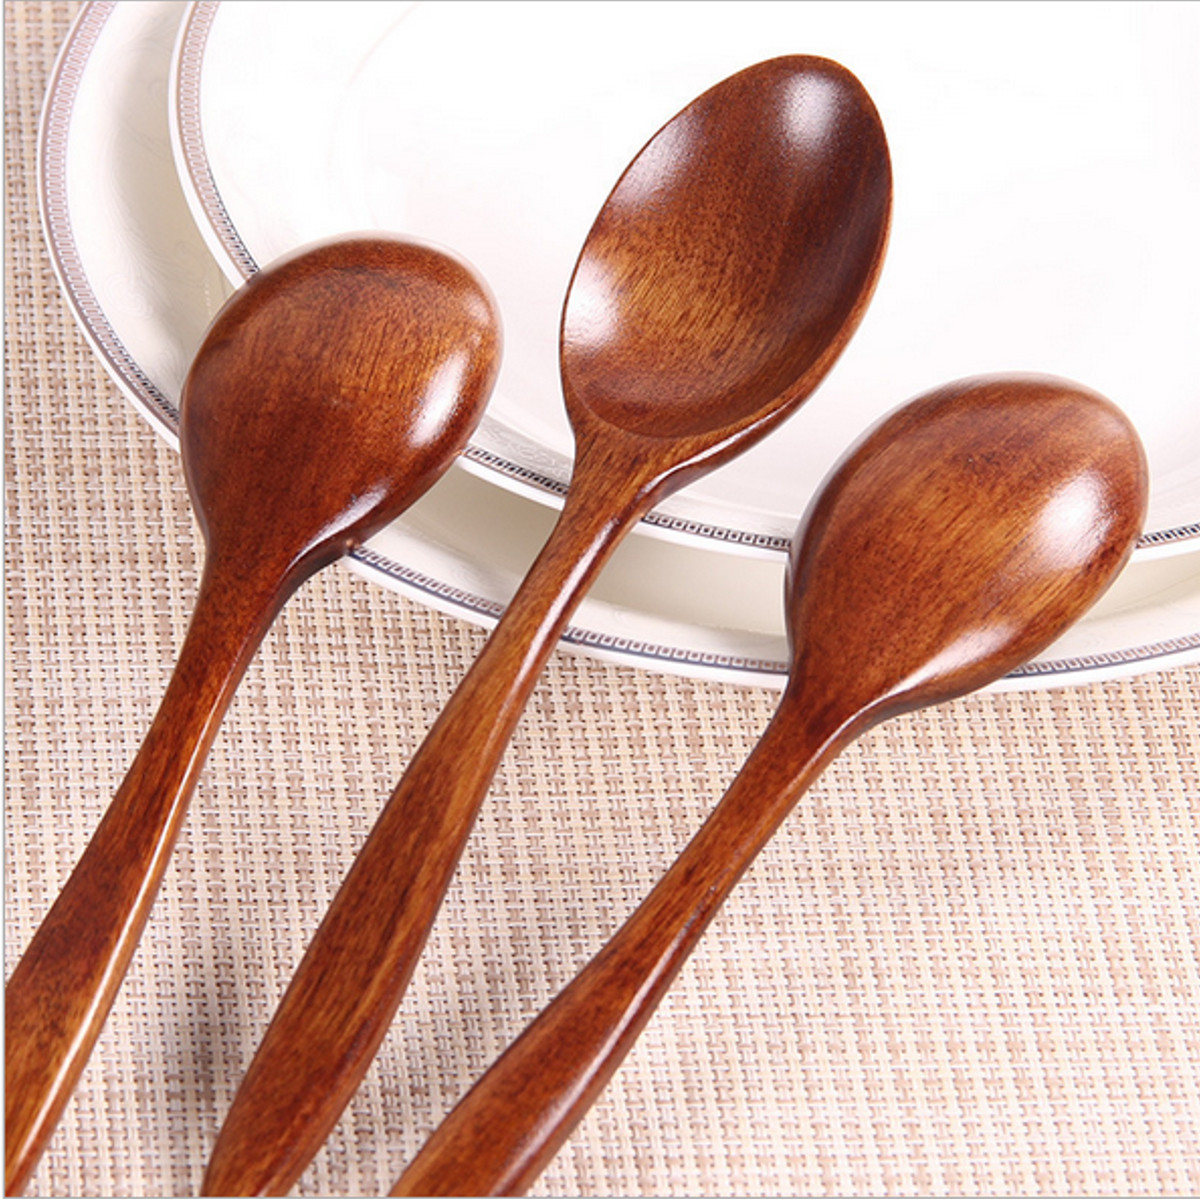 5Pcs-Wooden-Cooking-Kitchen-Utensil-Coffee-Tea-Ice-Cream-Soup-Caterin-Spoon-Tool-1067937-7